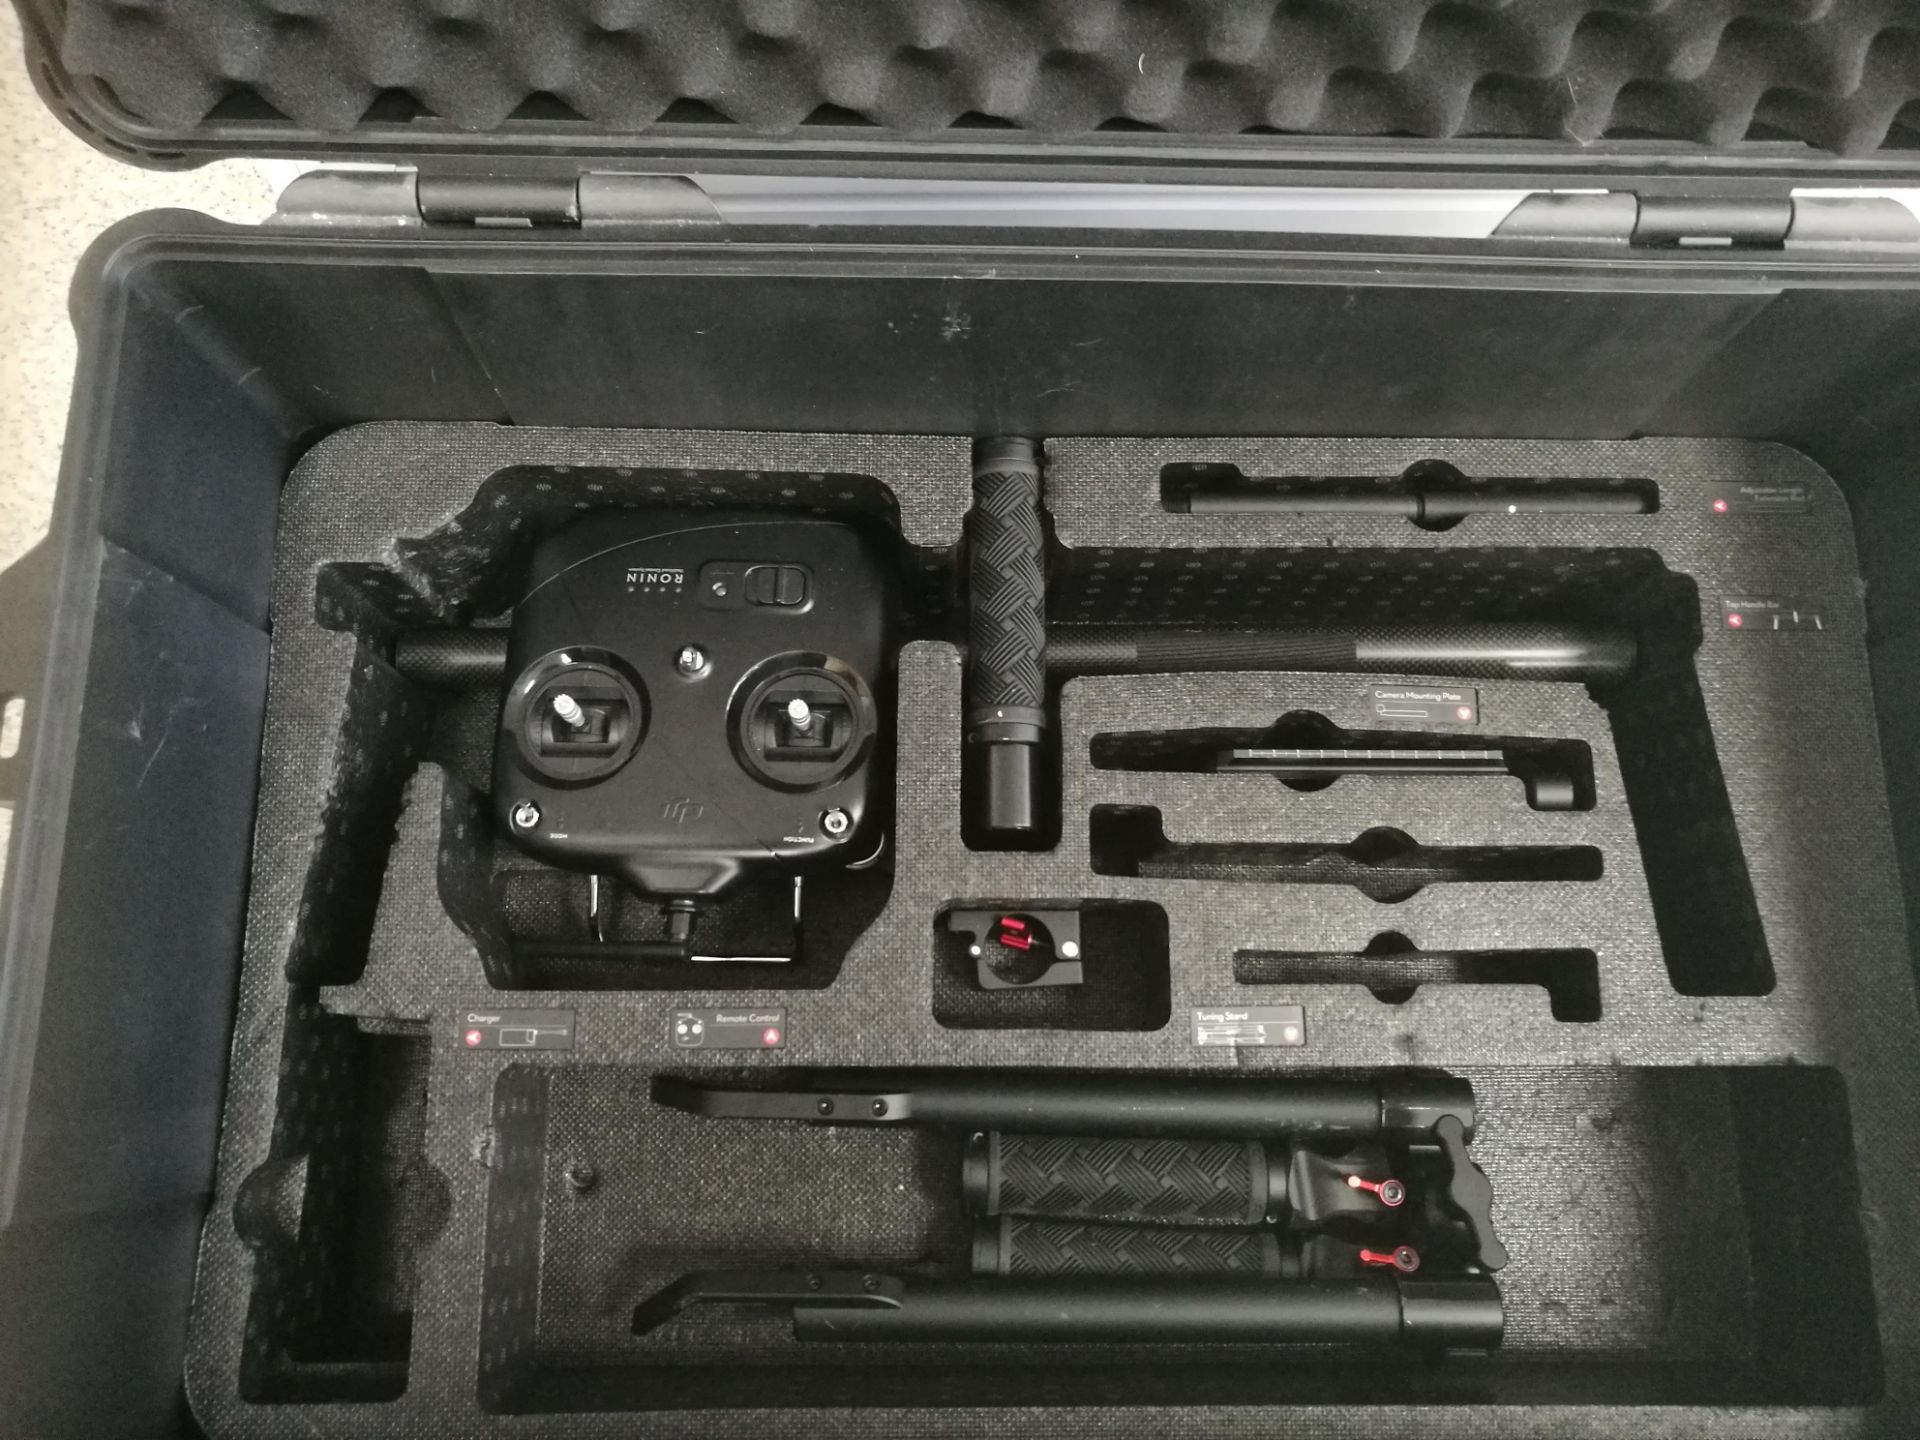 DJI Ronin 1 Gimbal w/ Extra Batteries, Grip & 2 x Cases - Image 4 of 6